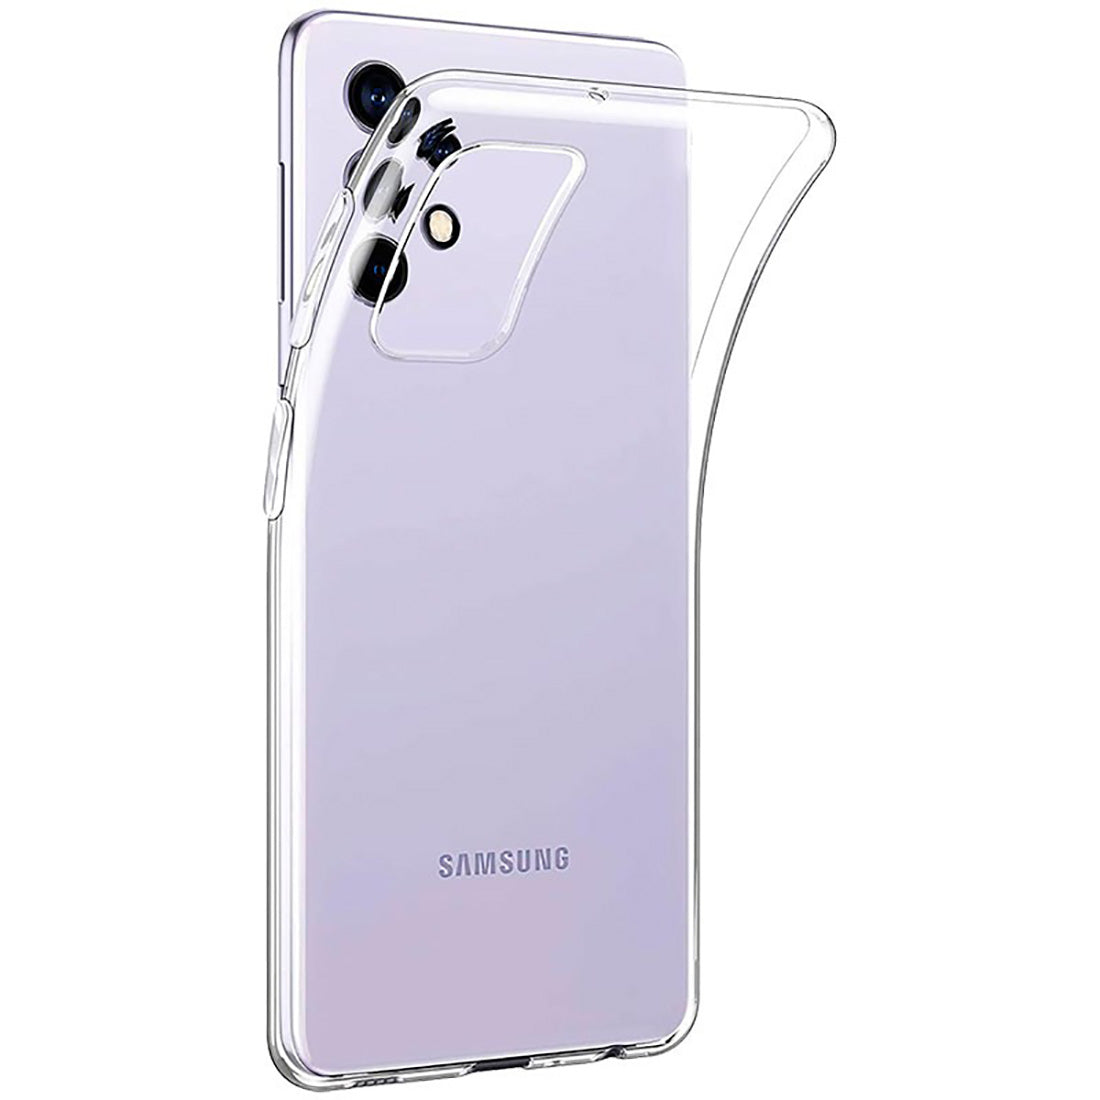 Super Clear Back Case Cover for Samsung Galaxy M32 5G / A32 5G